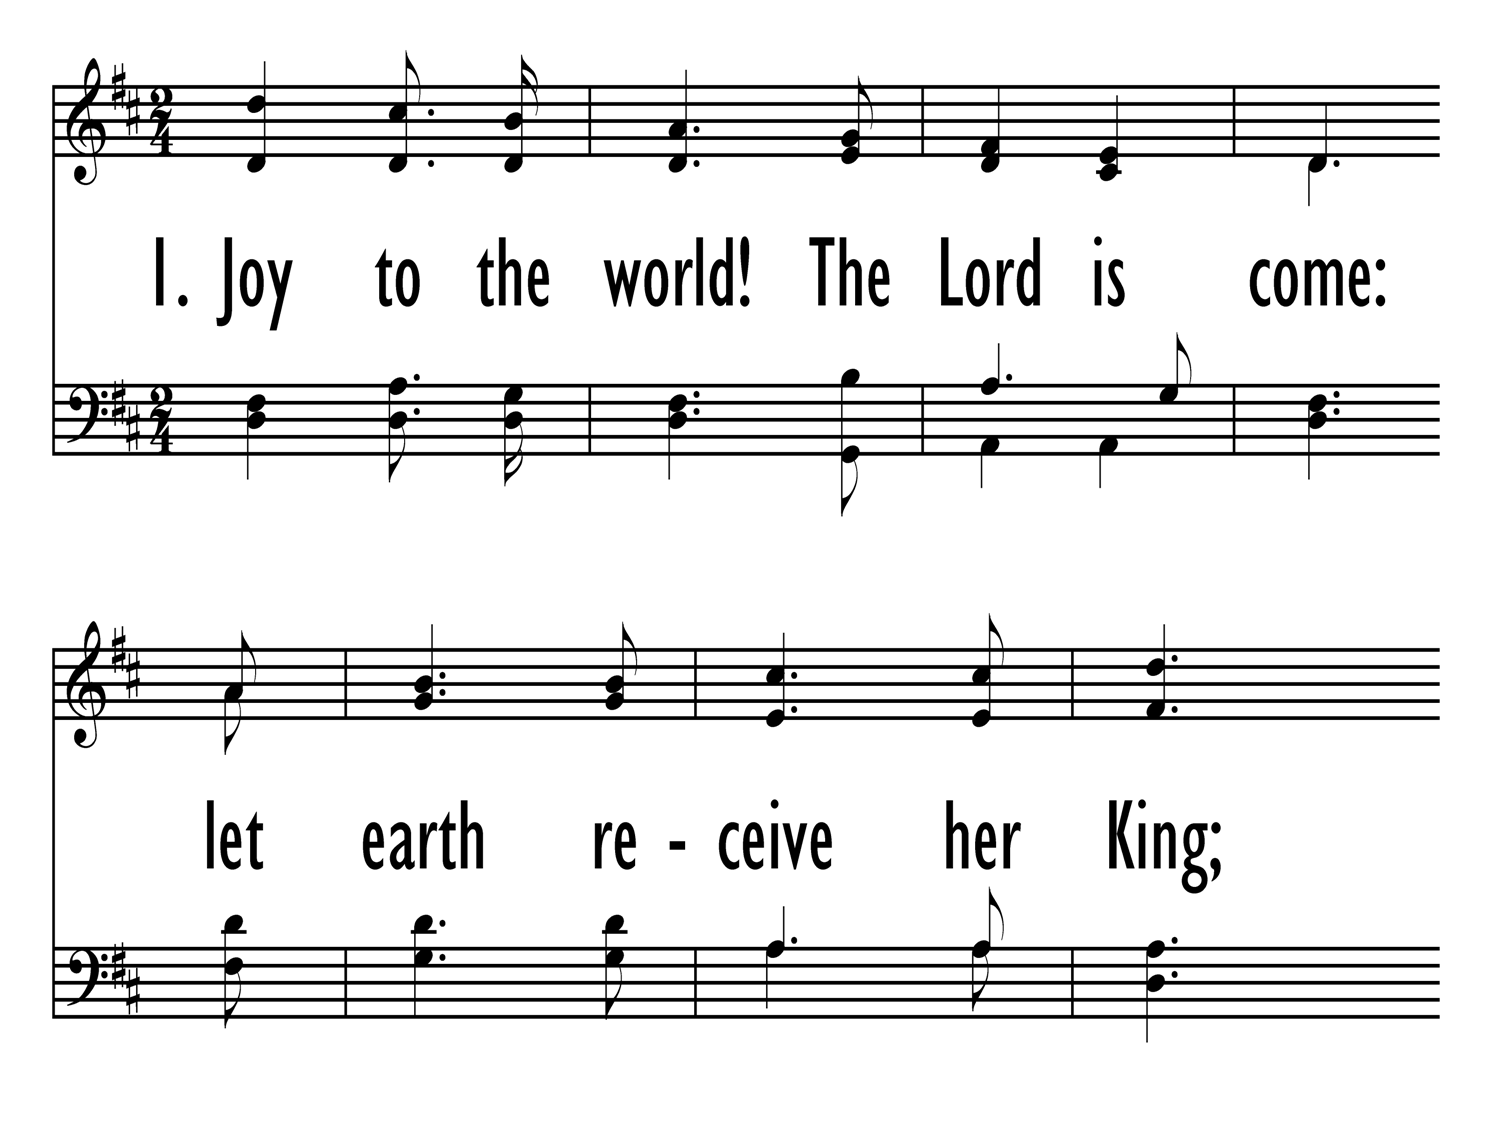 JOY TO THE WORLD! THE LORD IS COME (Trinity Hymnal 195) - Hymnary.org